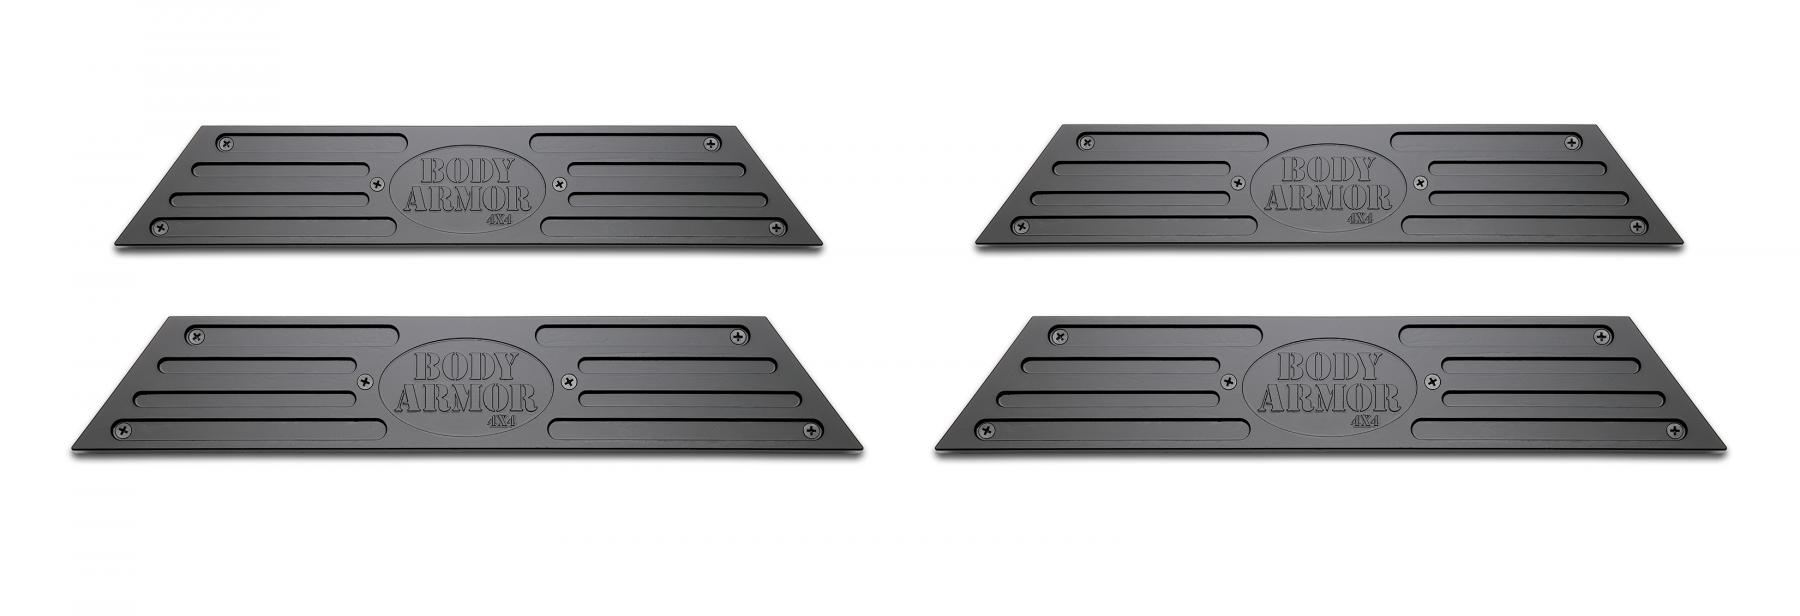 Poly step pads for the Body Armor RockSteps, set of 4 pads - Click Image to Close